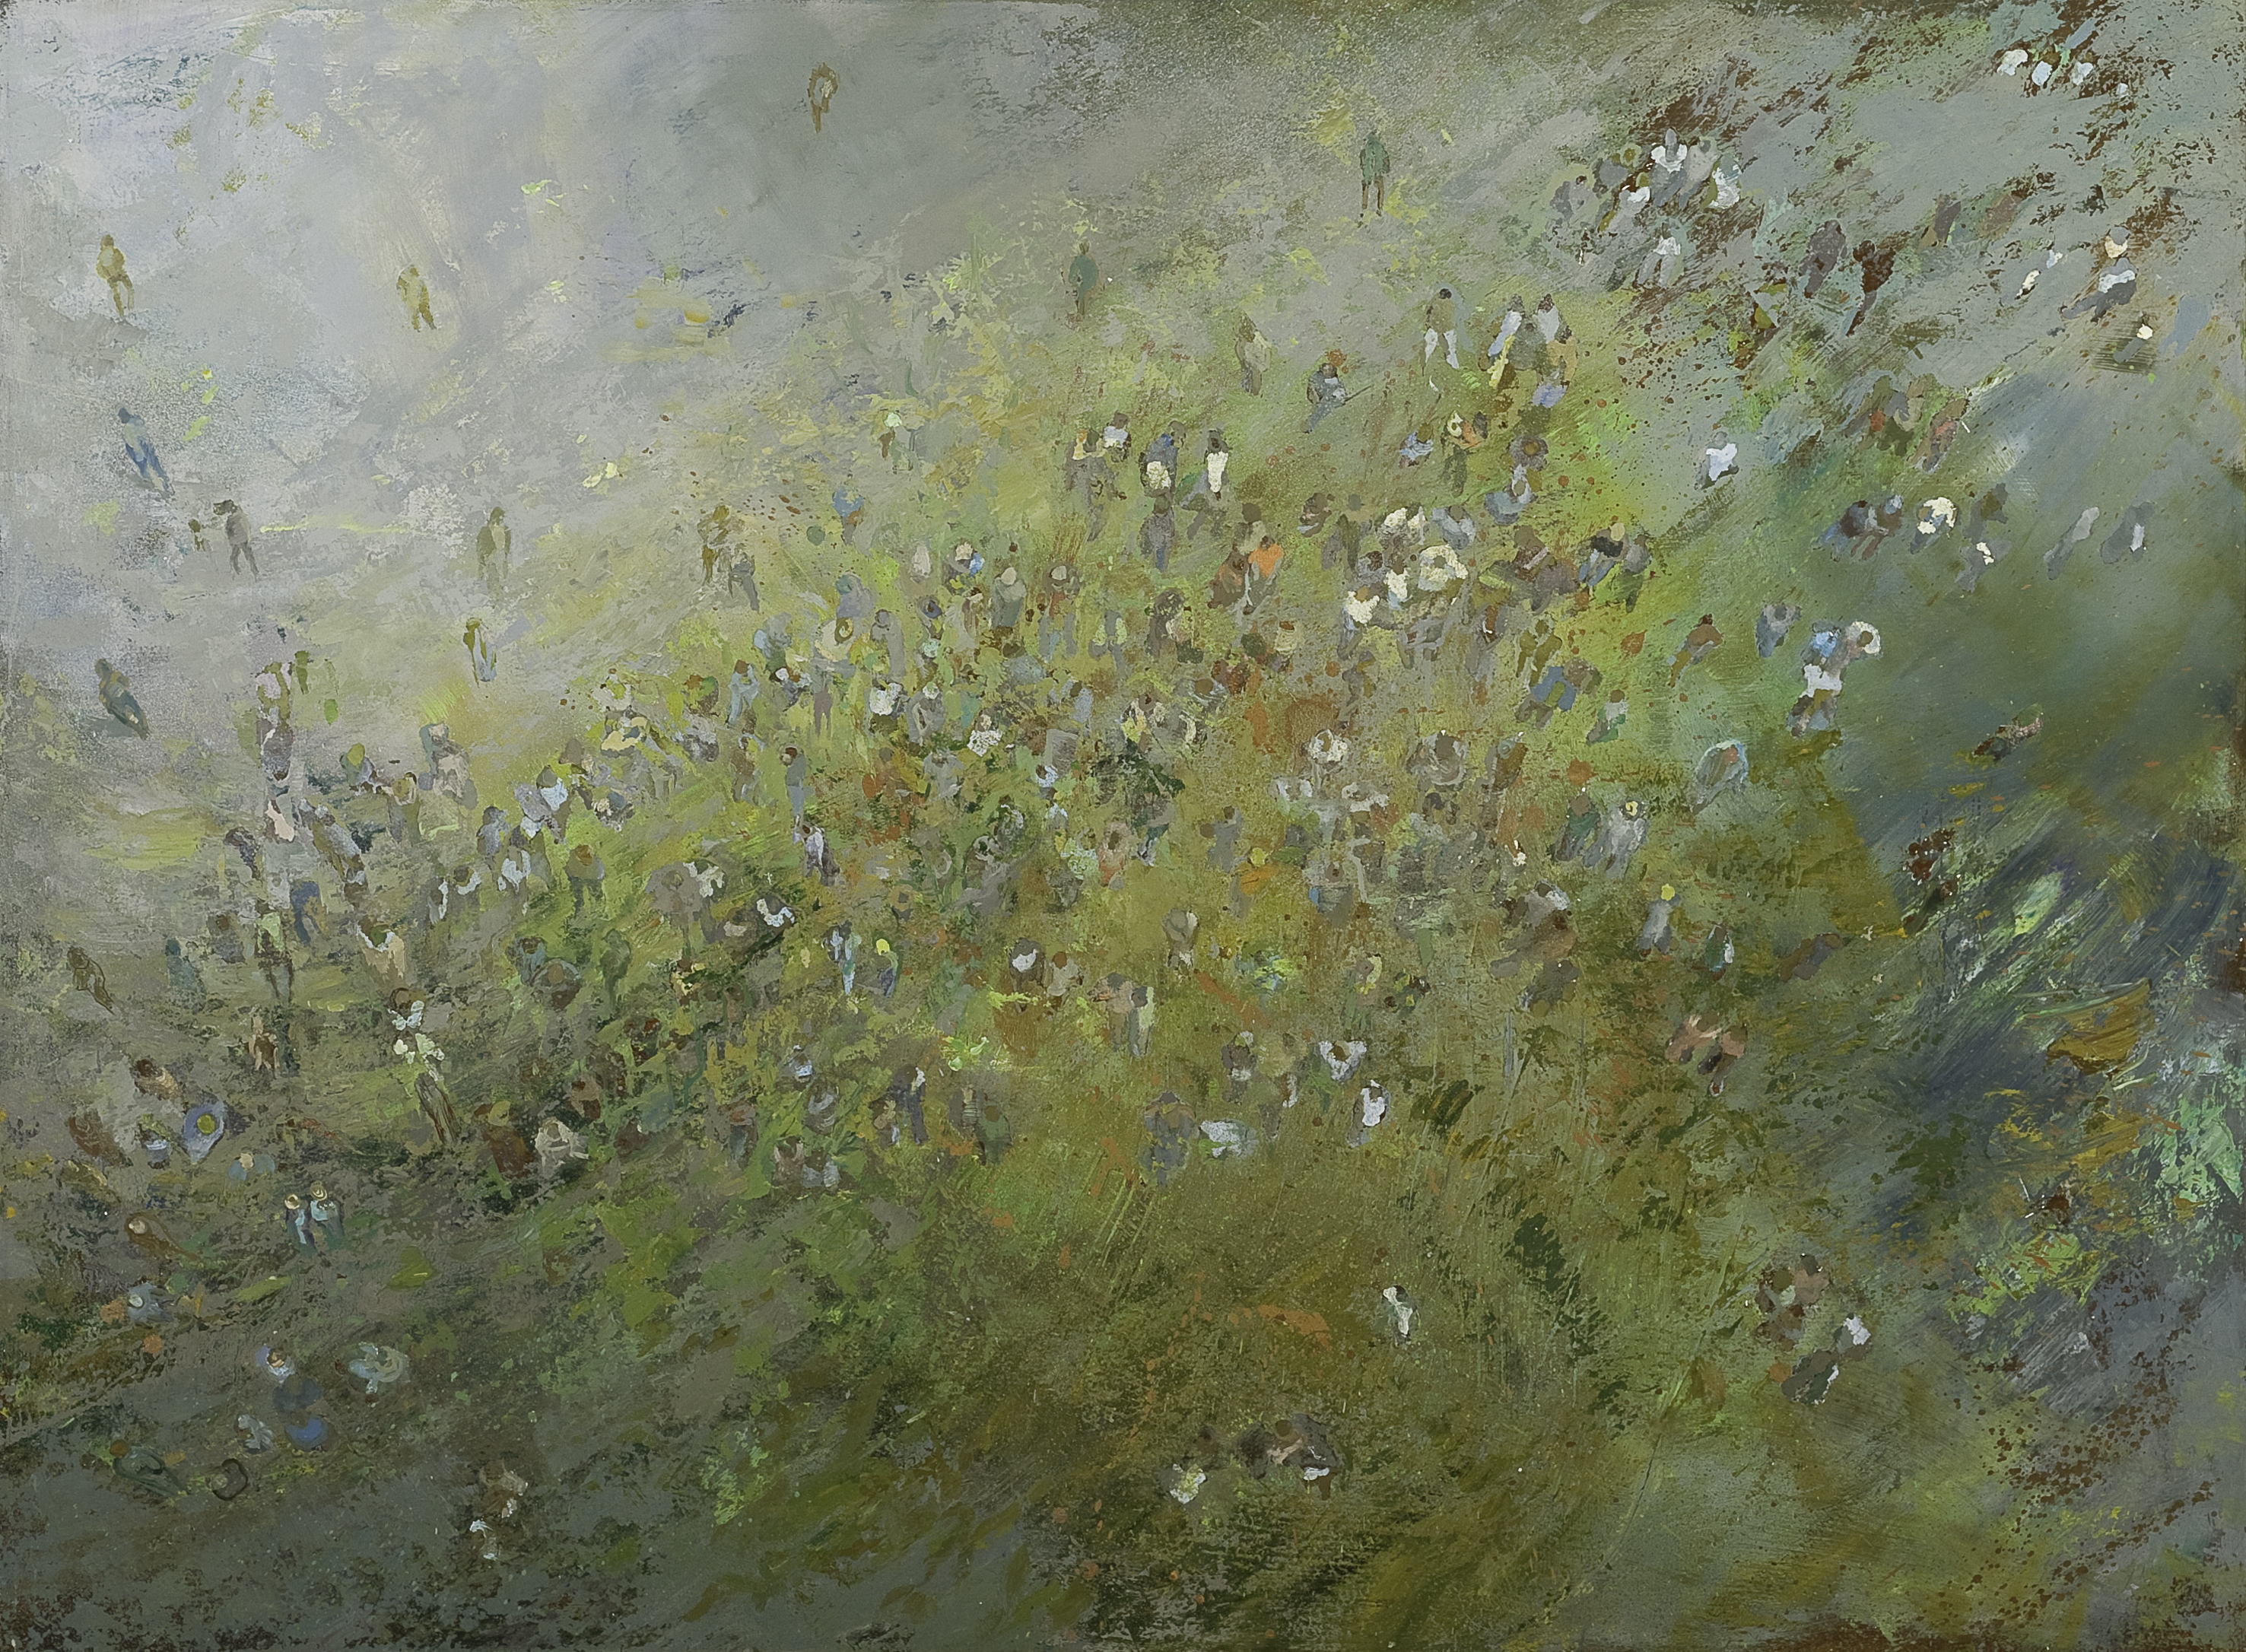 From Nowhere, 2011, oil on canvas, 140 x 170 cm